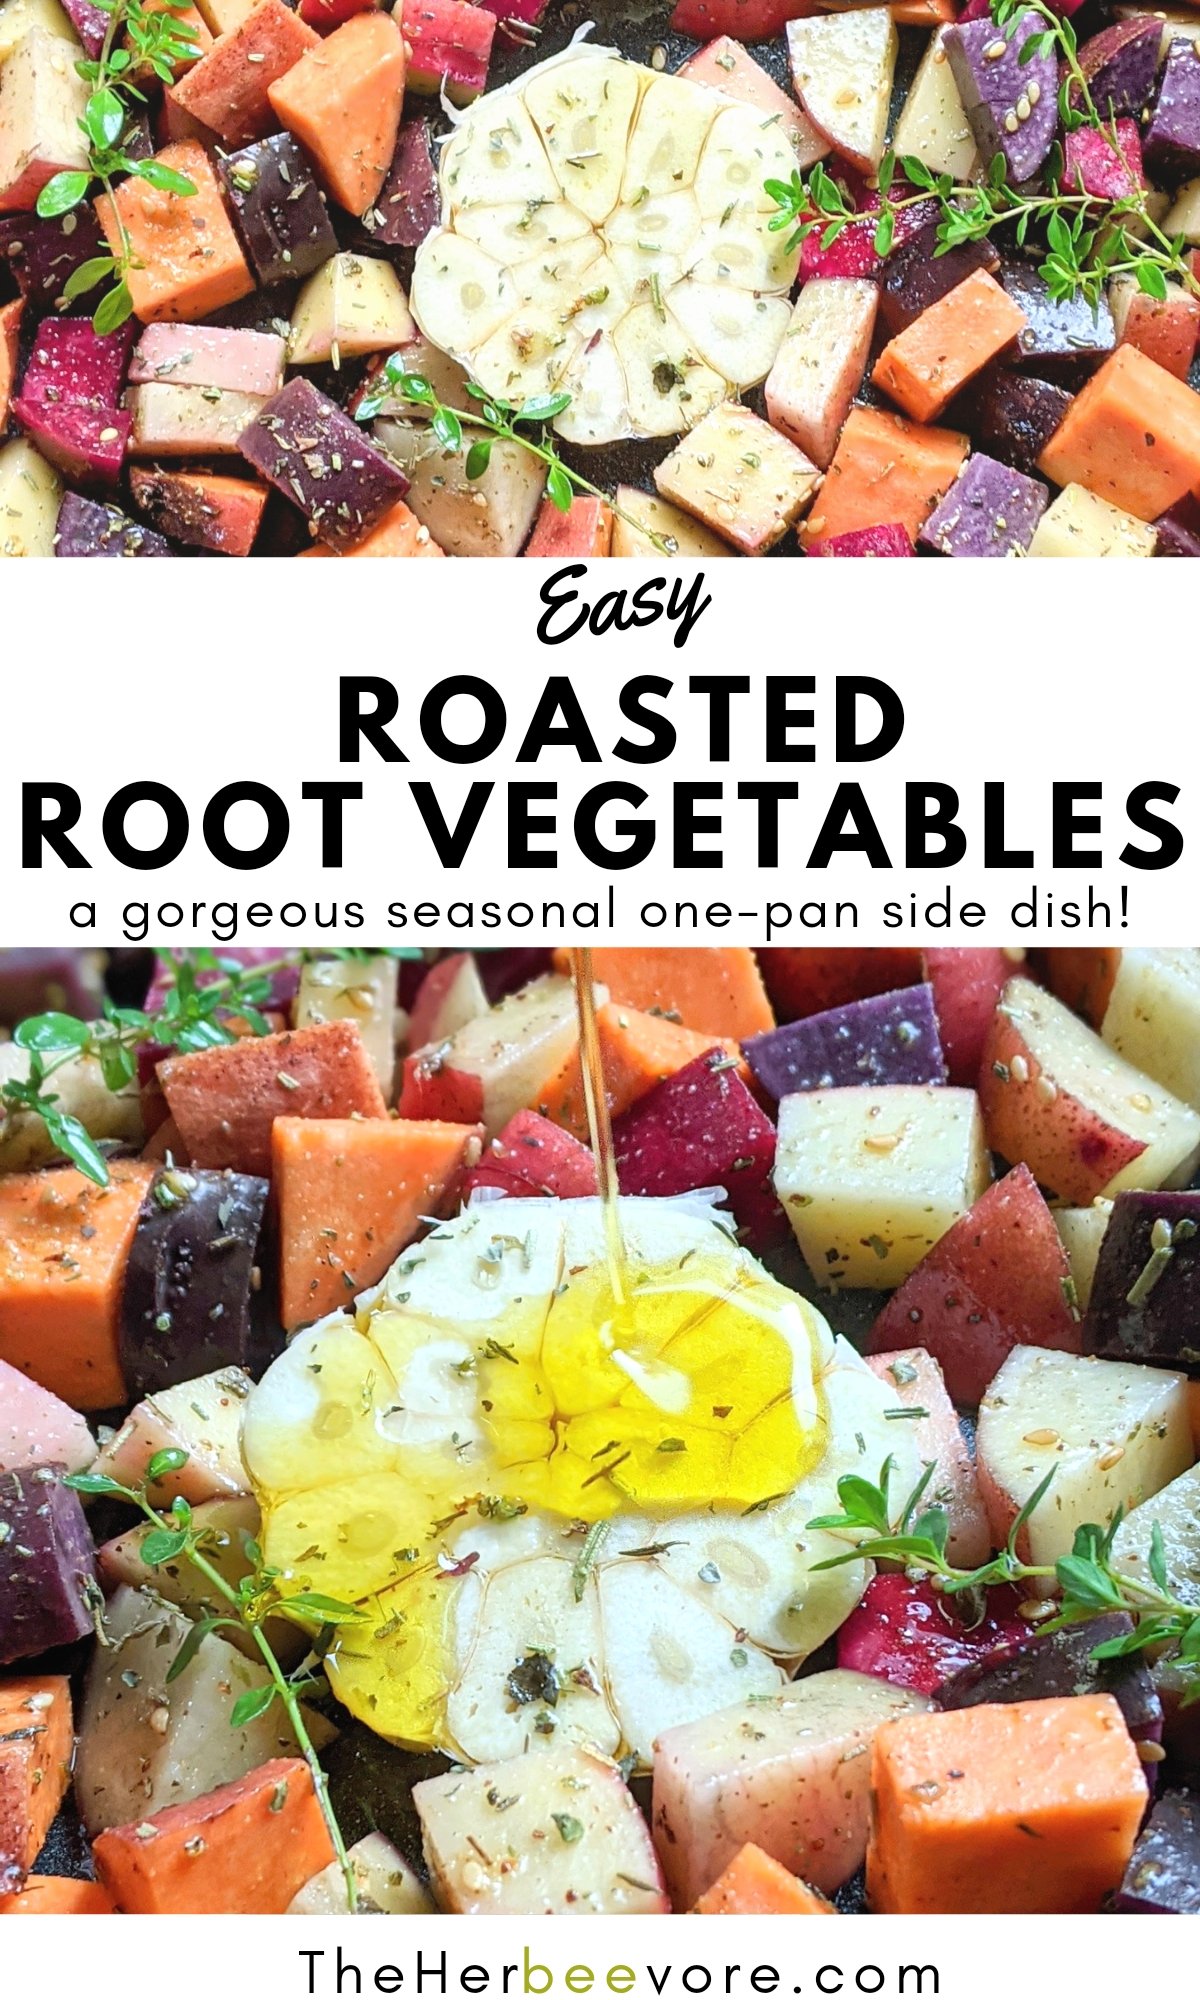 roasted root vegetables with thyme rosemary beets butternut squash carrots and potatoes vegan vegetarian gluten free sheet pan veggies